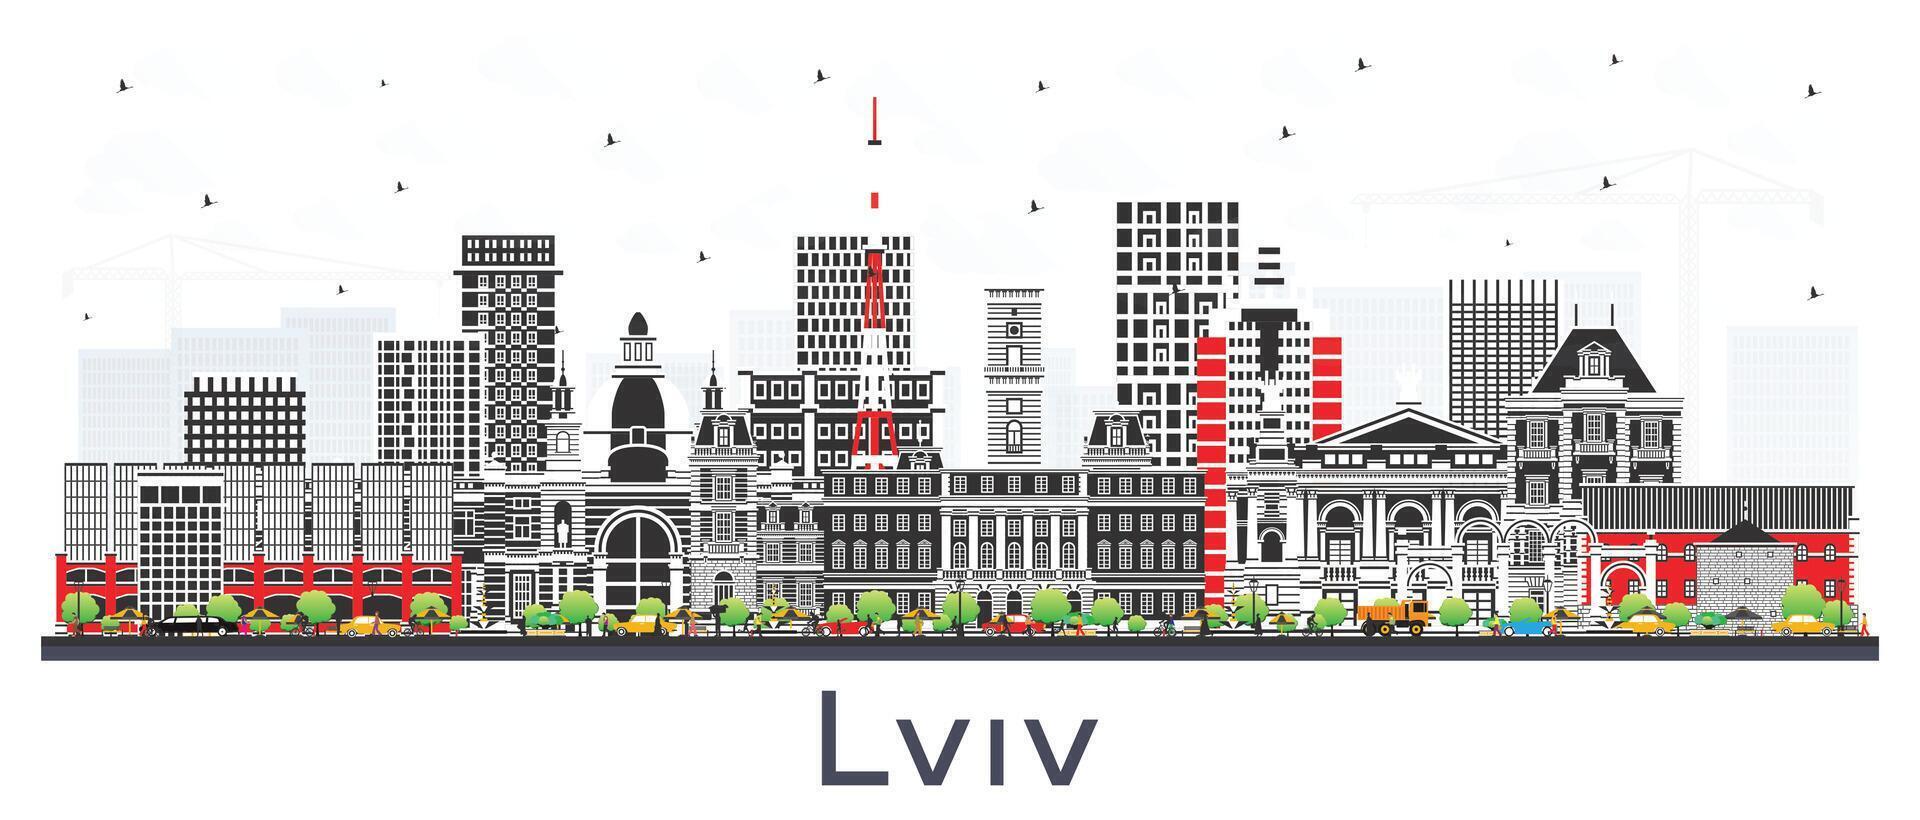 Lviv Ukraine City Skyline with Color Buildings isolated on white. Lviv Cityscape with Landmarks. Business Travel and Tourism Concept with Historic Architecture. vector